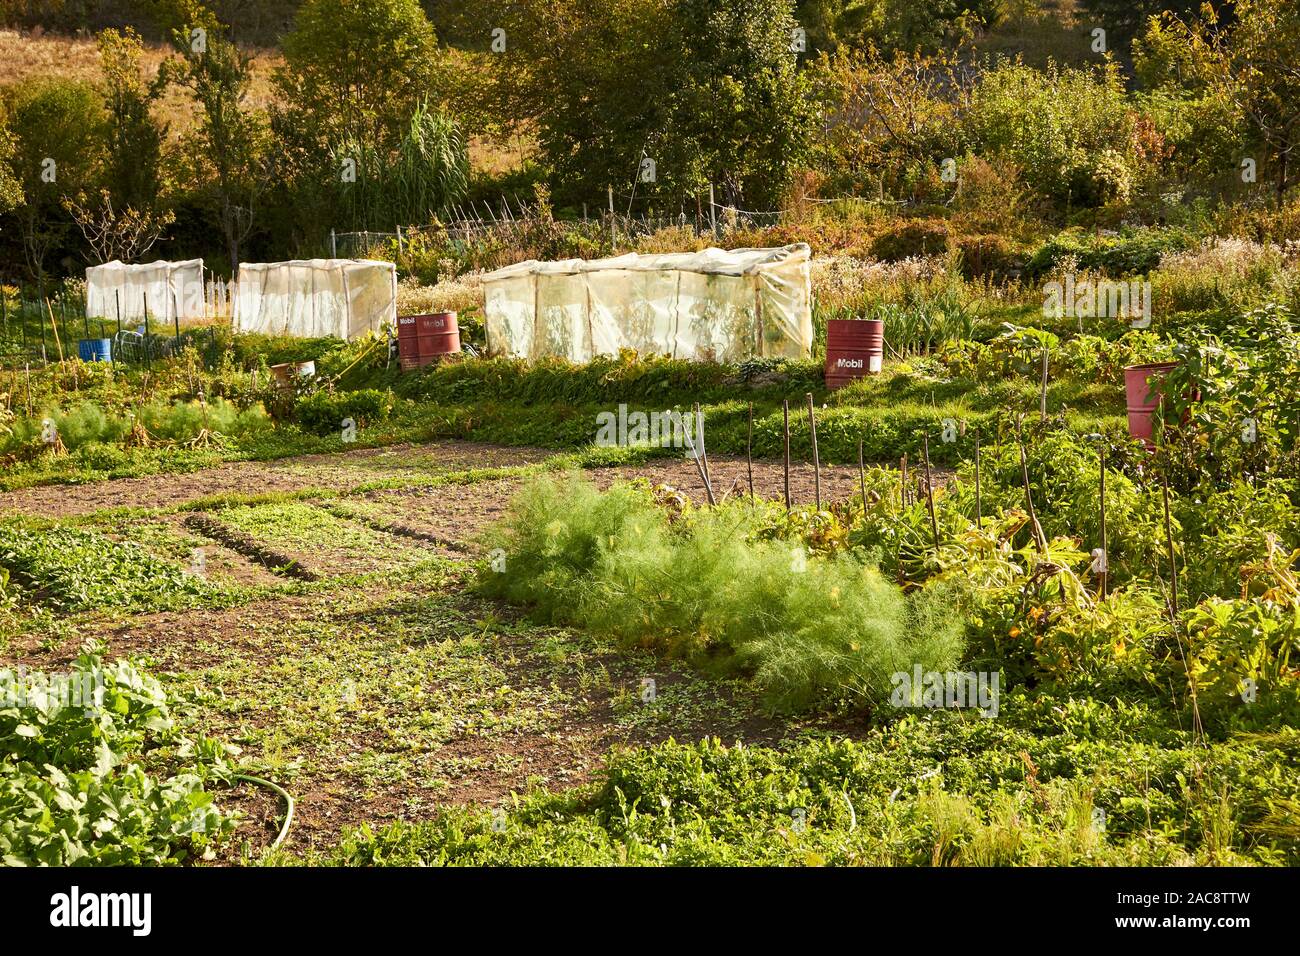 Community garden in Entracque, Cuneo, Piemonte, Italy. Called an allotment in some places. Stock Photo